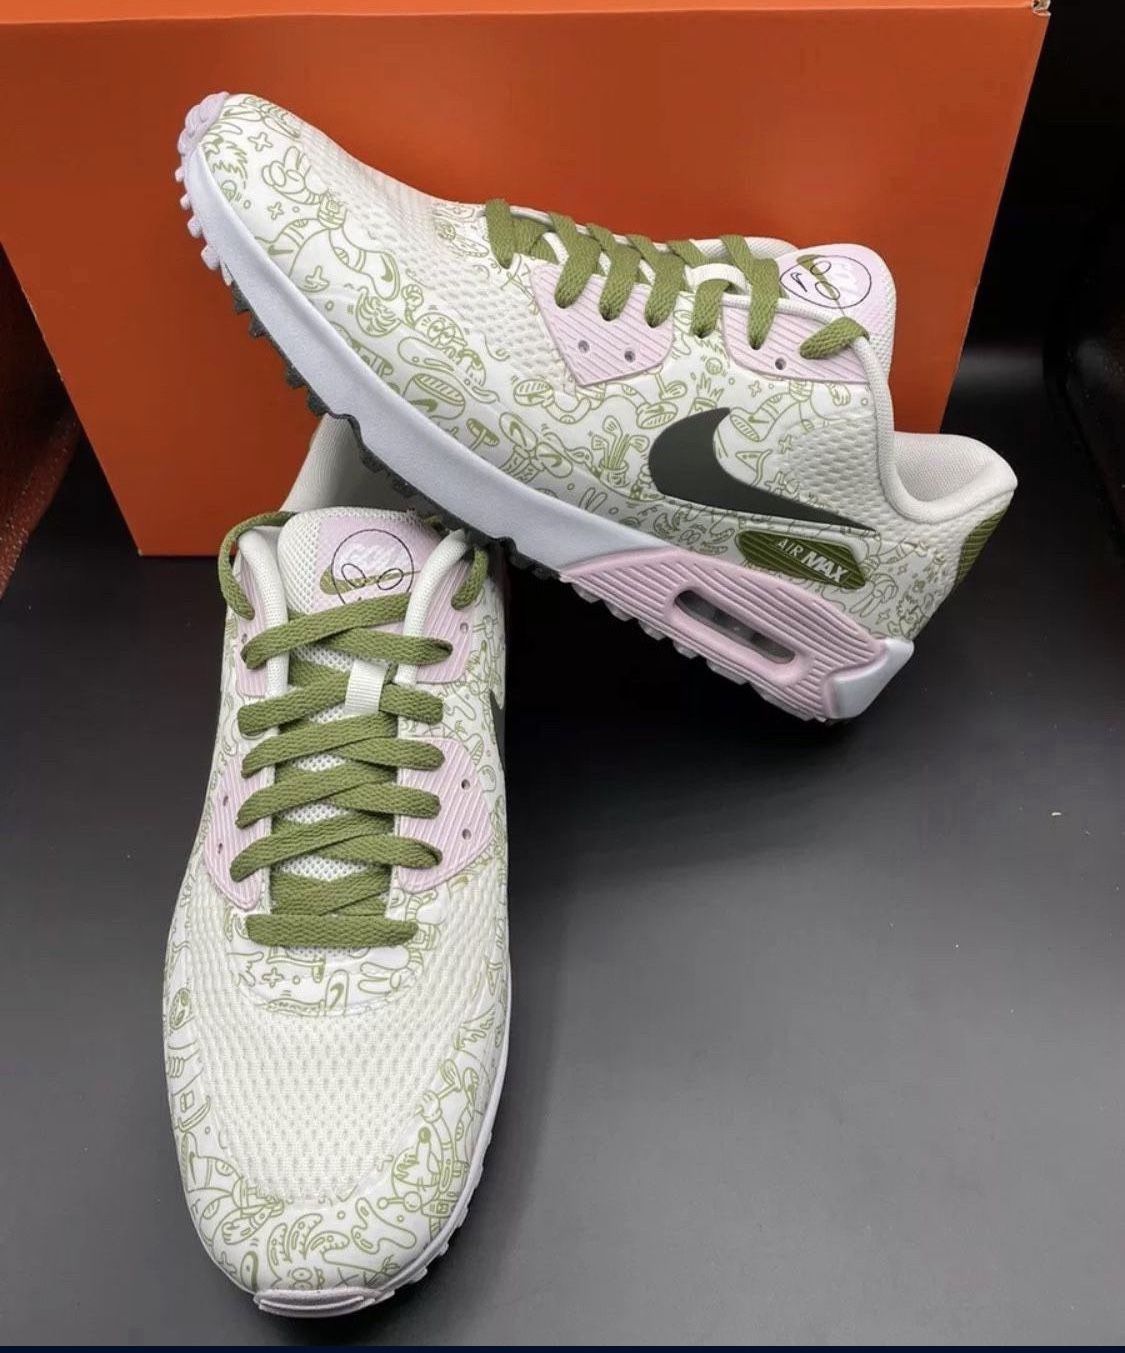 New Air Max 90 G NRG Golf Shoes Size Aliens Jordan Infinity Victory Boost for Sale in Compton, CA - OfferUp